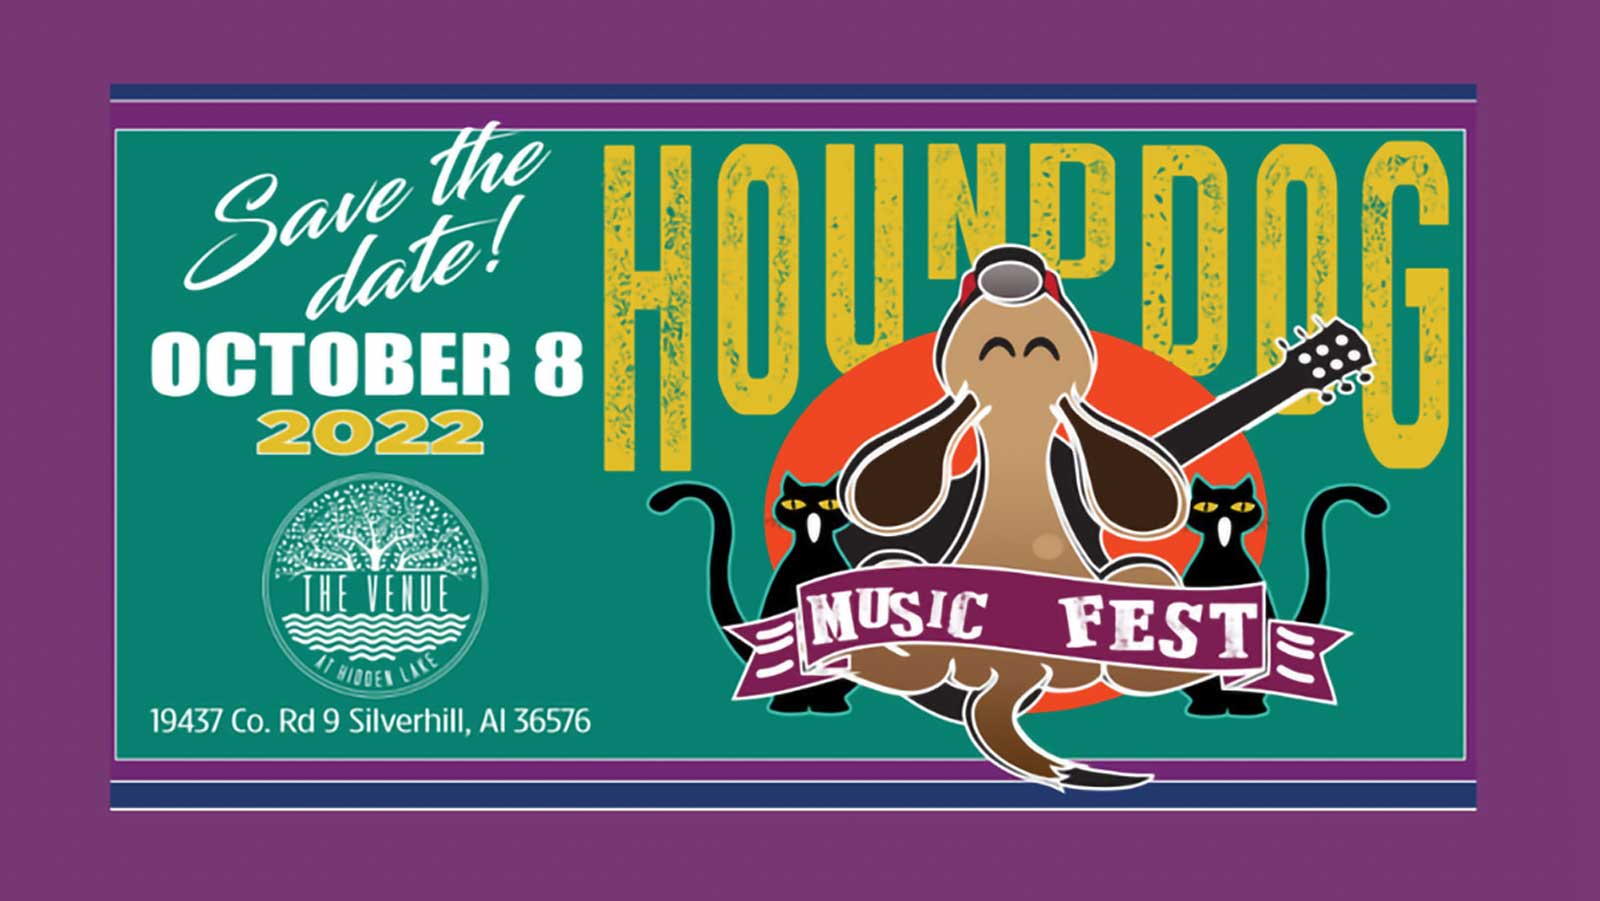 Hound Dog Music Fest Coming Up